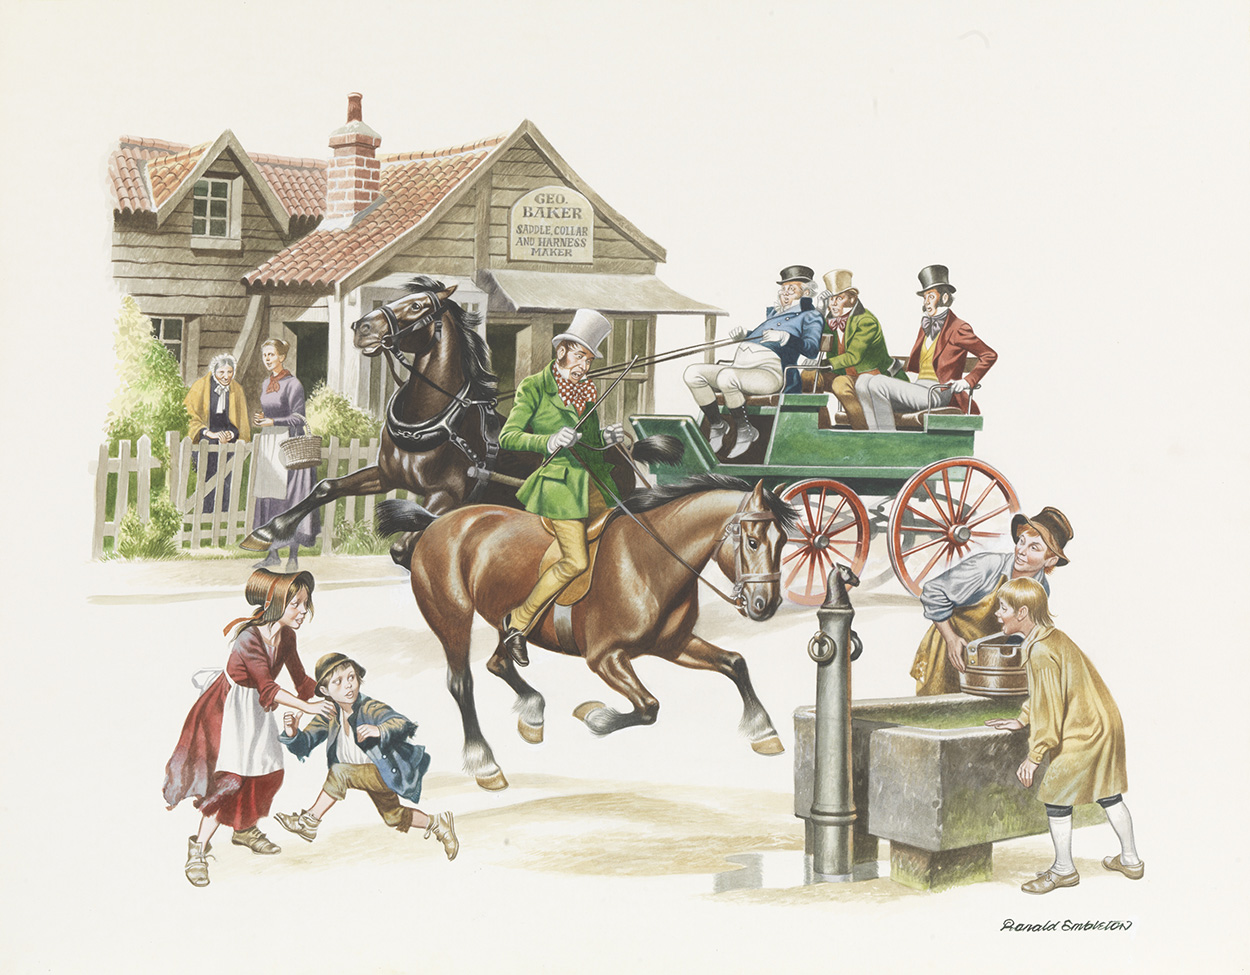 Pickwick Papers - Horsemen (Original) (Signed) art by Charles Dickens (Ron Embleton) at The Illustration Art Gallery